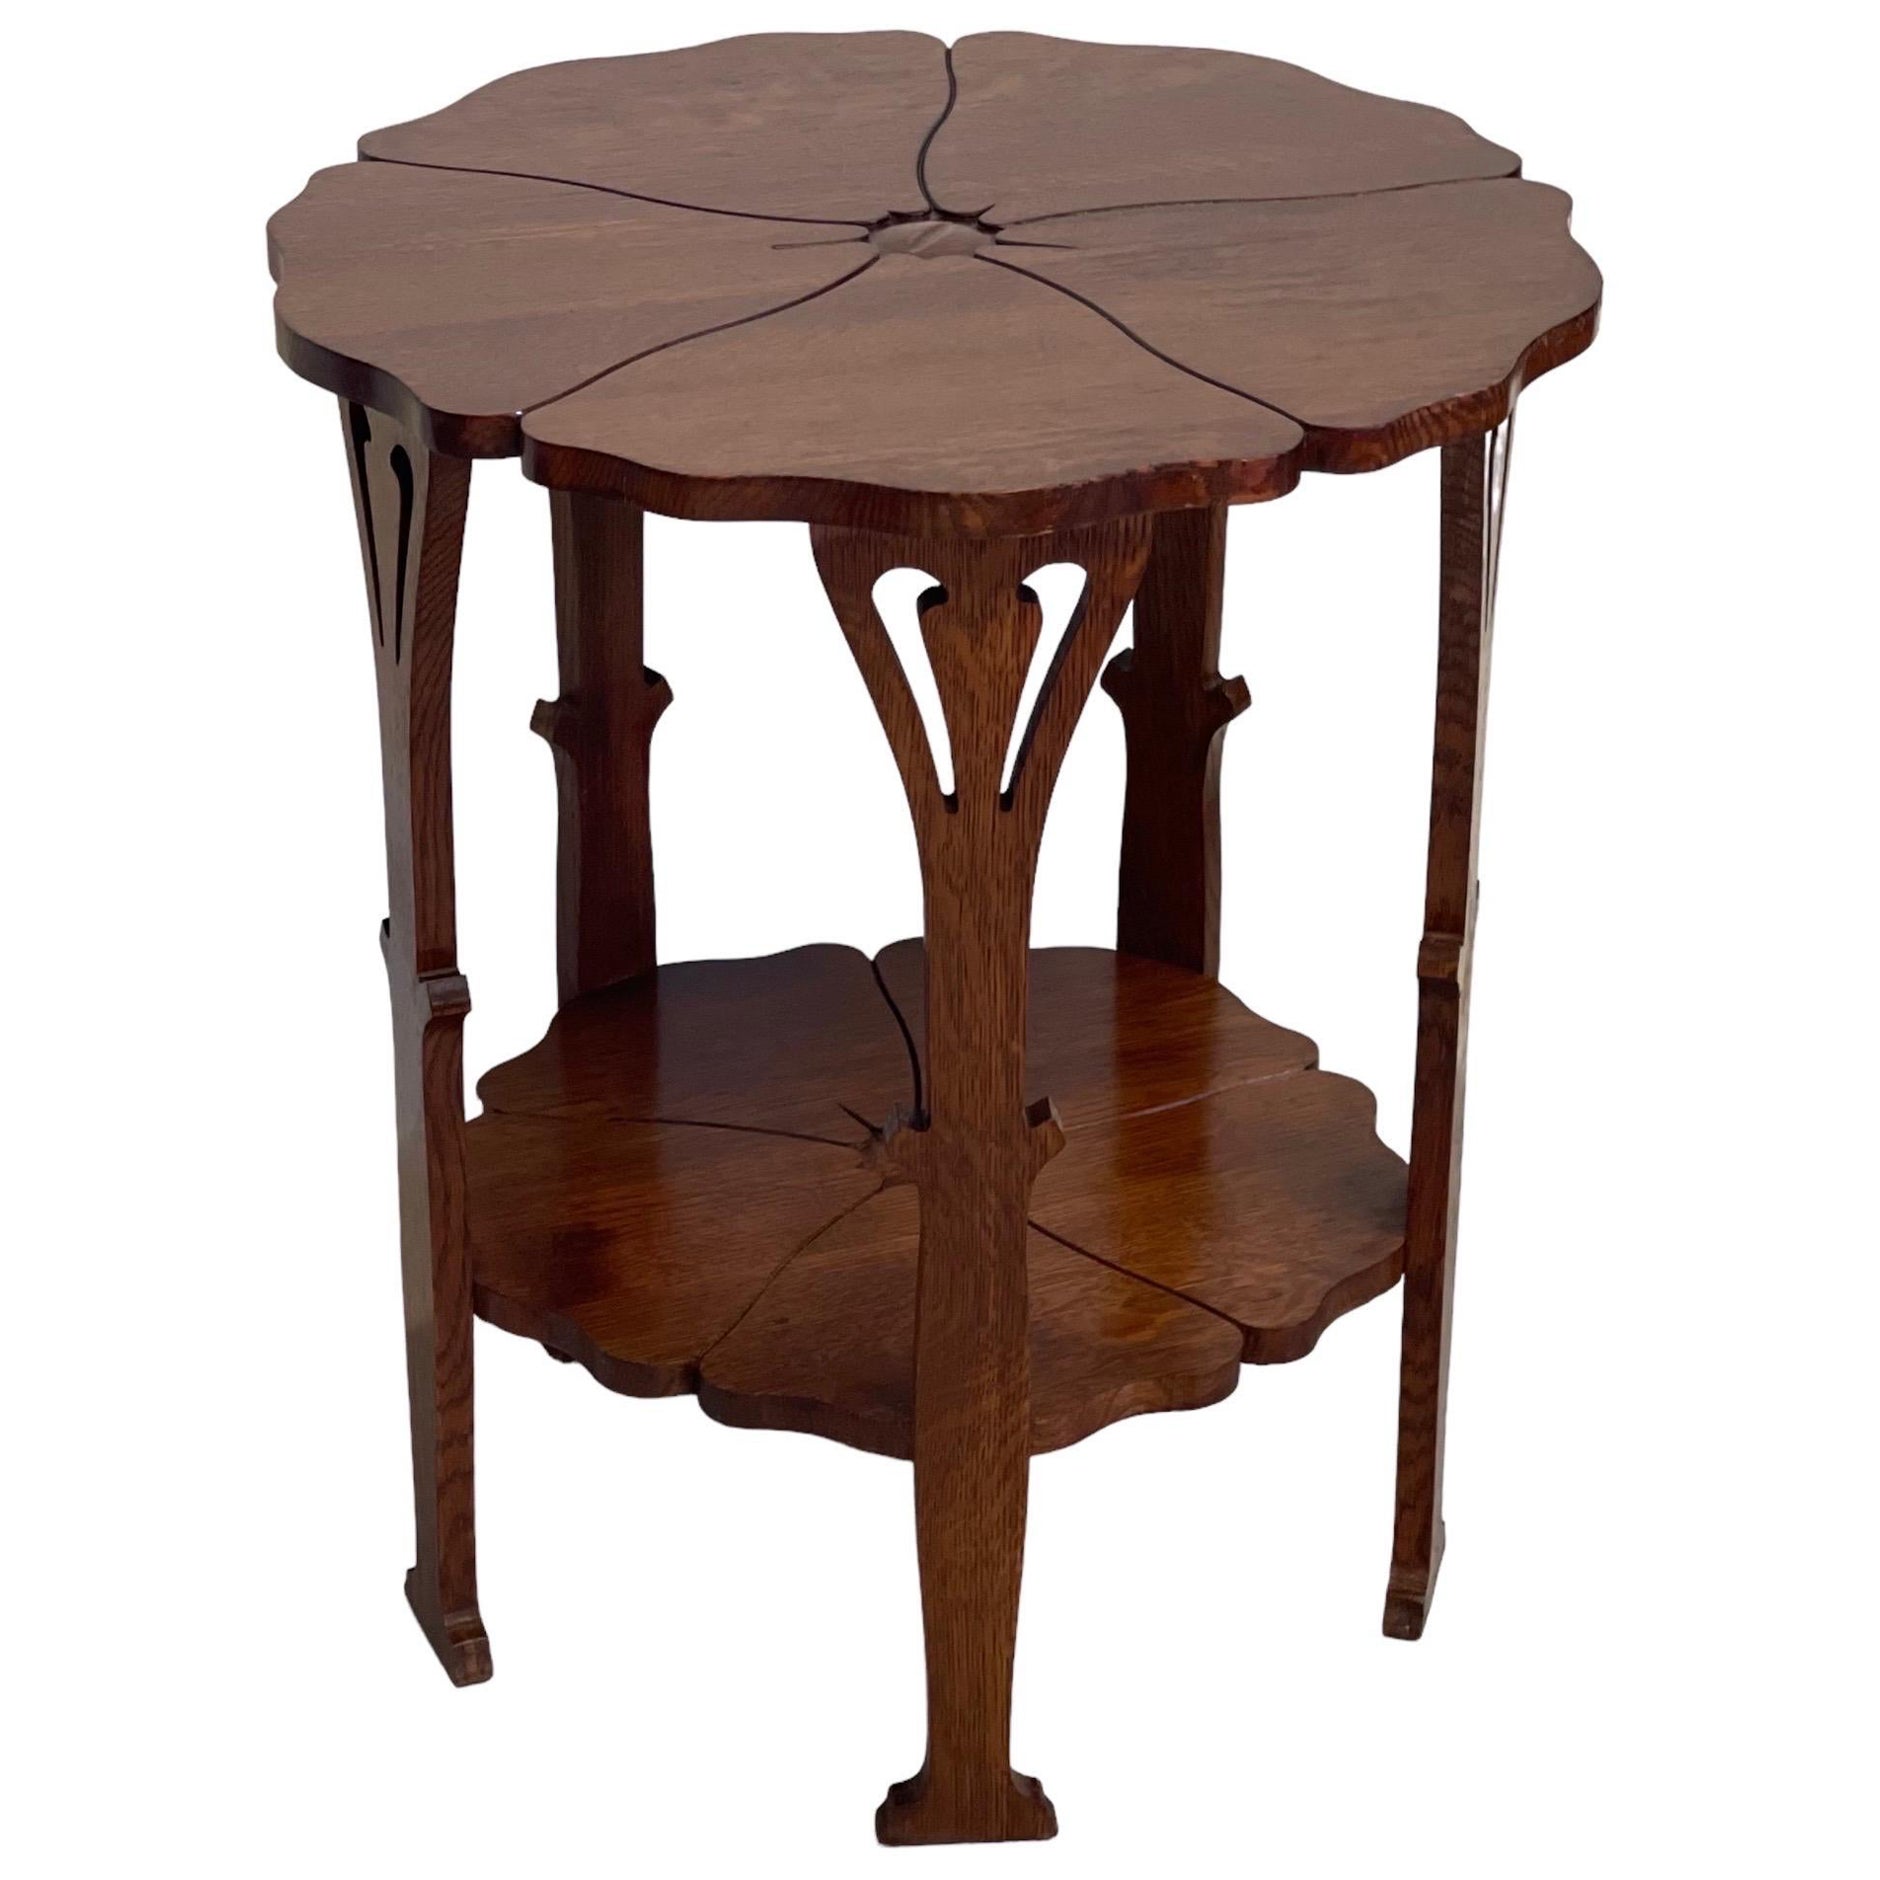 Delicately Designed Antique Gustave Stickily Poppy Table With Floral Motif For Sale